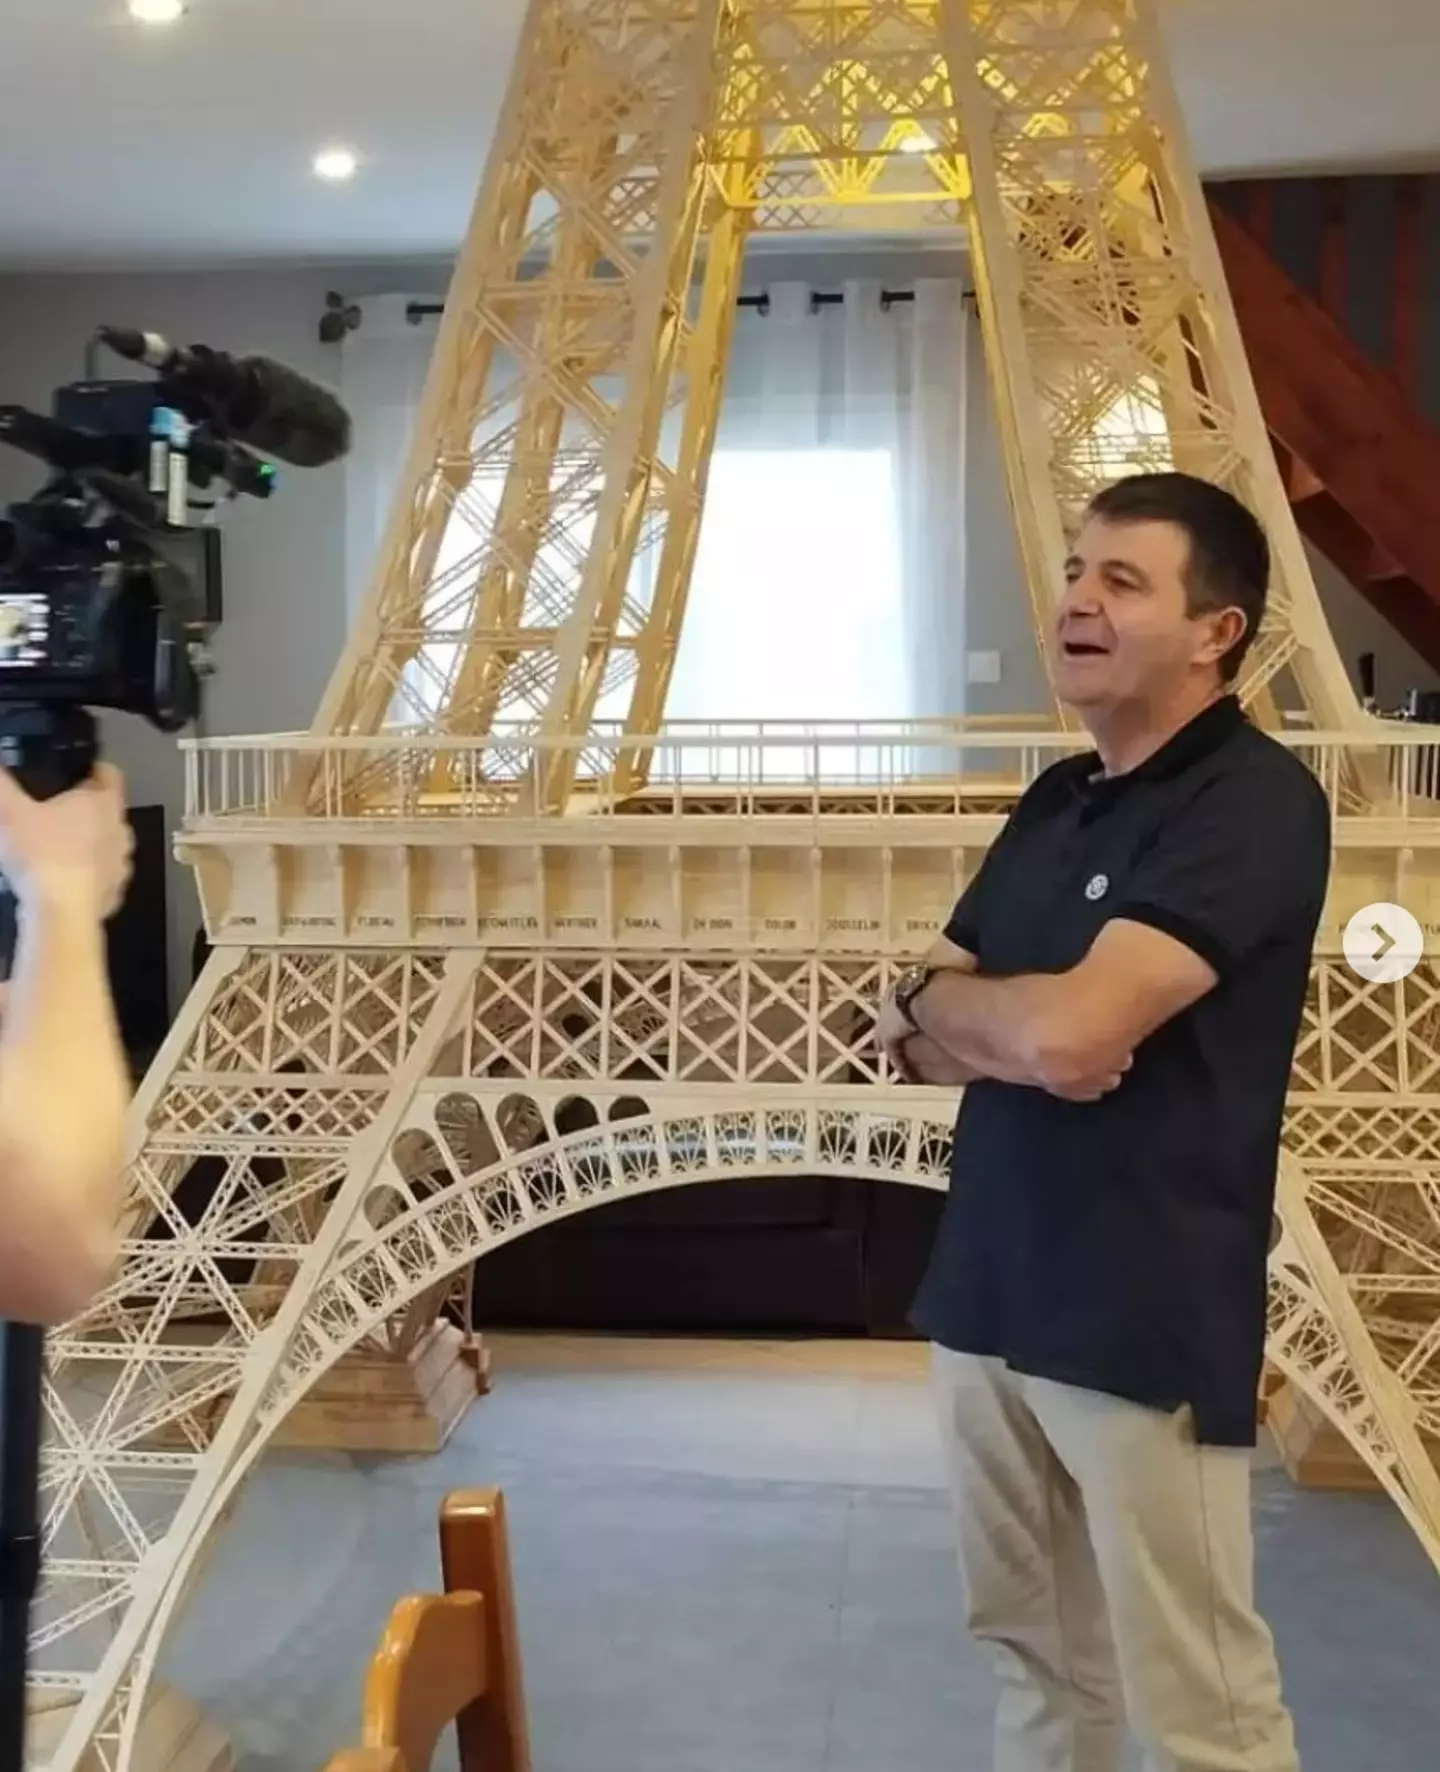 47-year-old Richard Plaud  showed his patriotism to his country with his own impressive entry of the Eiffel Tower.